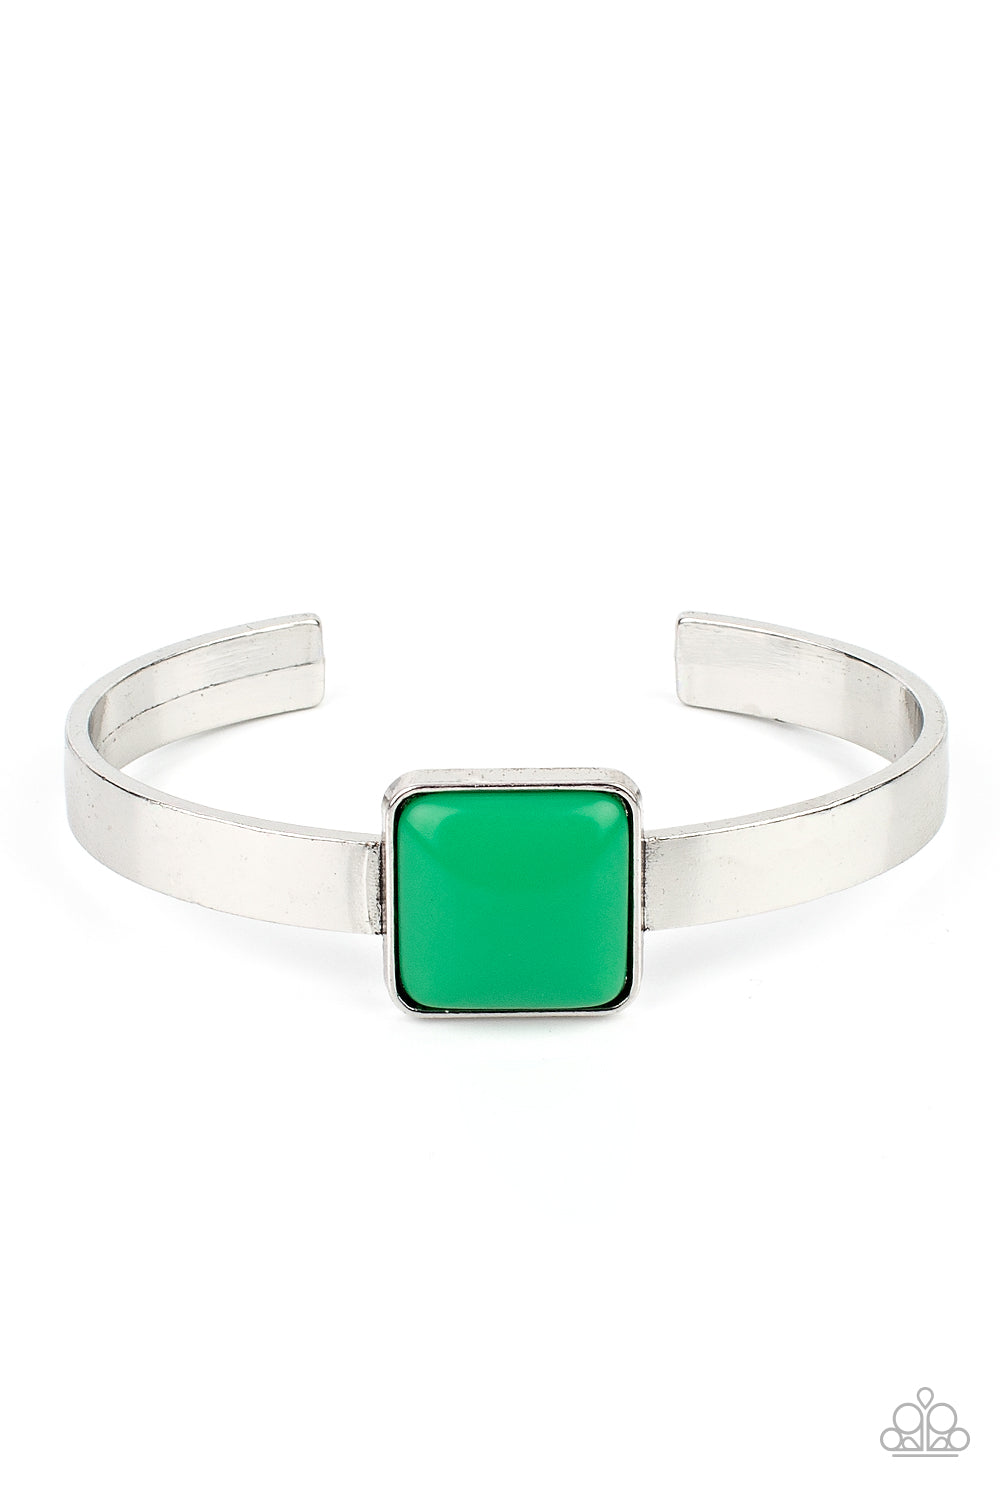 square Mint Green bead is pressed into the center of a sleek silver frame